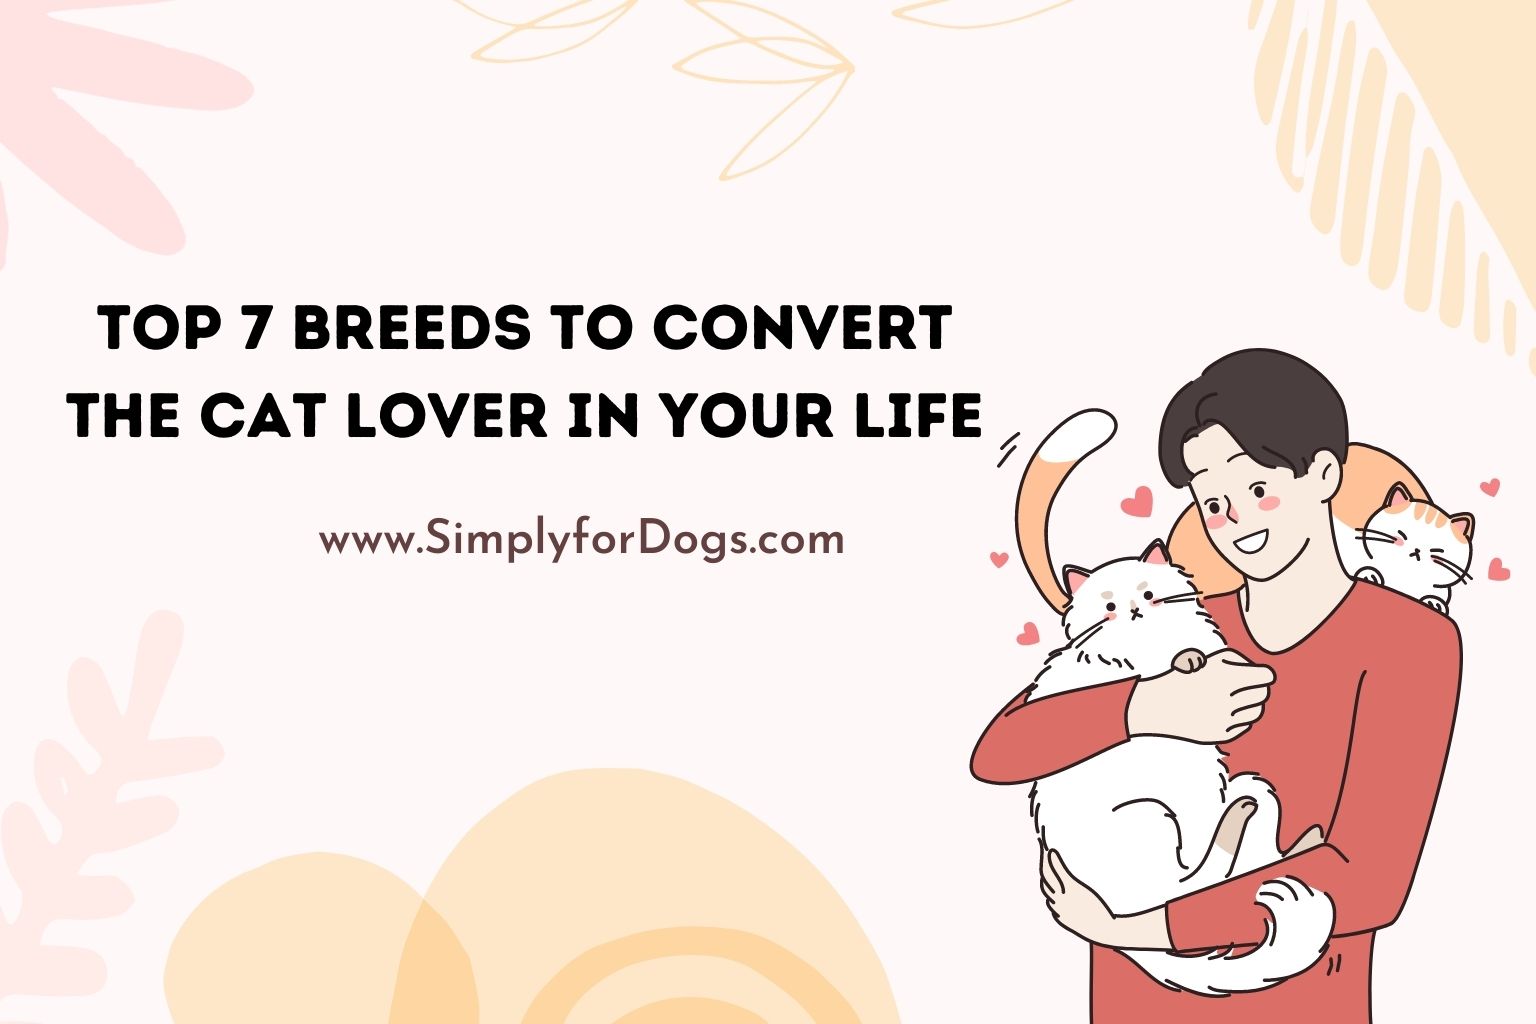 Top 7 Breeds to Convert the Cat Lover in Your Life